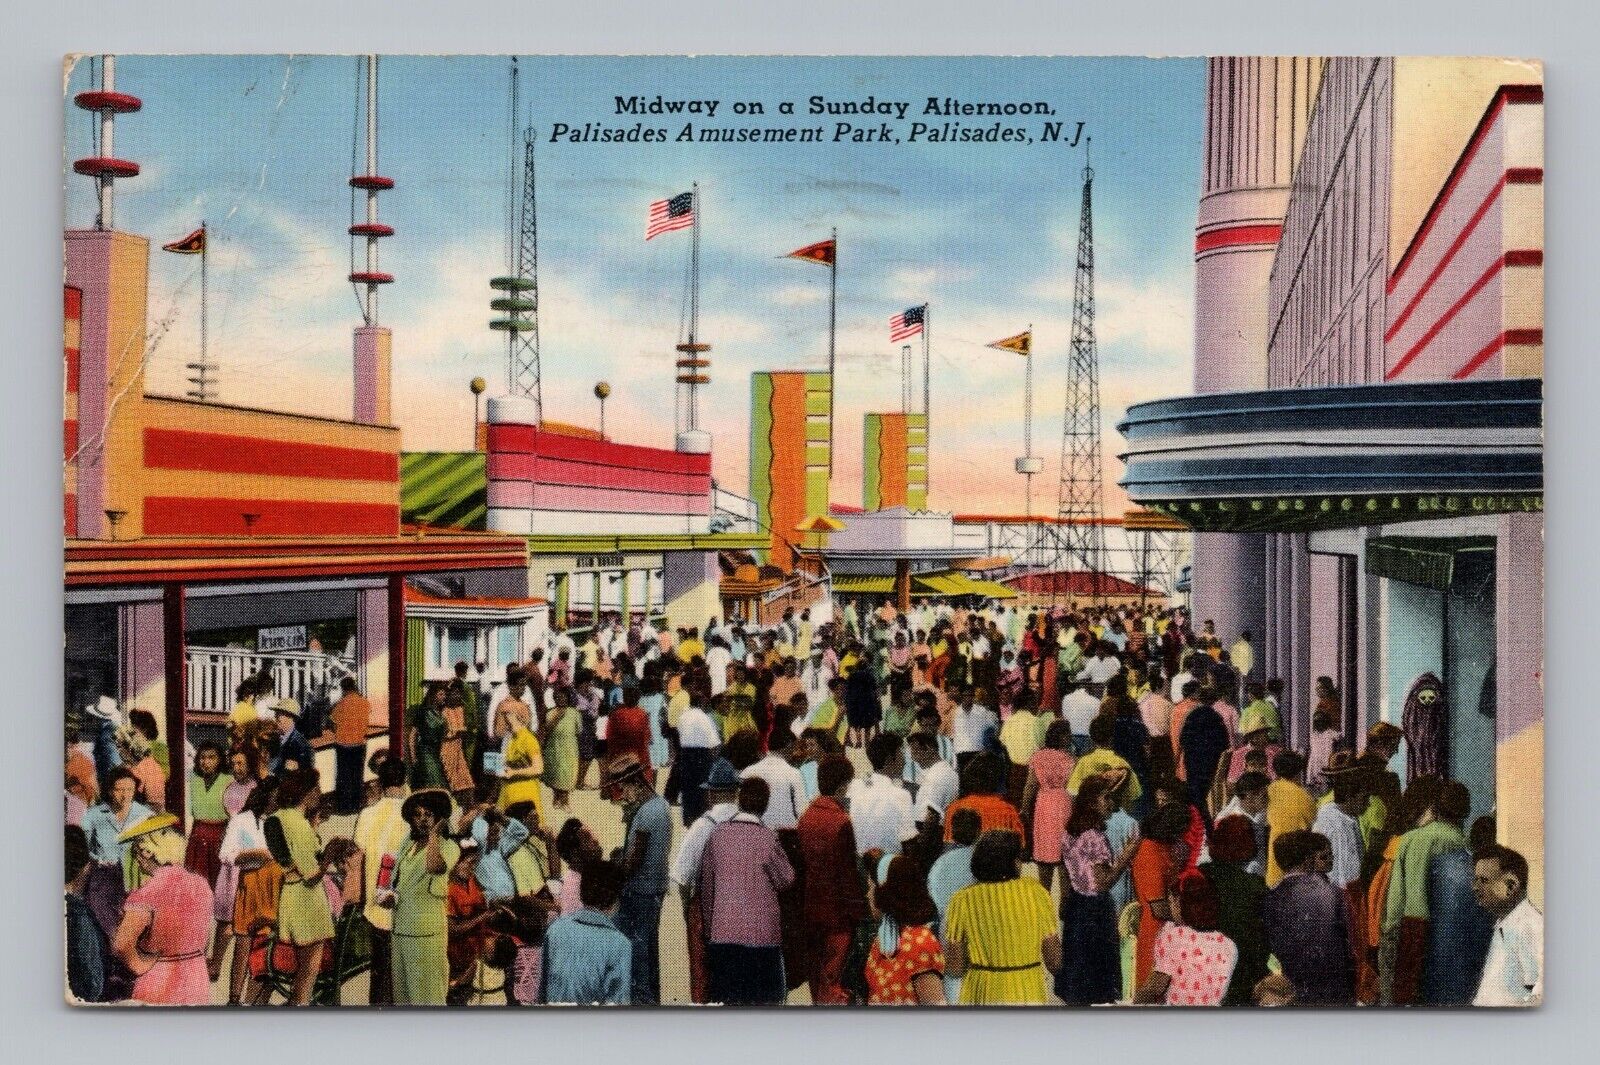 Postcard Palisades Amusement Park New Jersey Midway on a Sunday Afternoon c1964